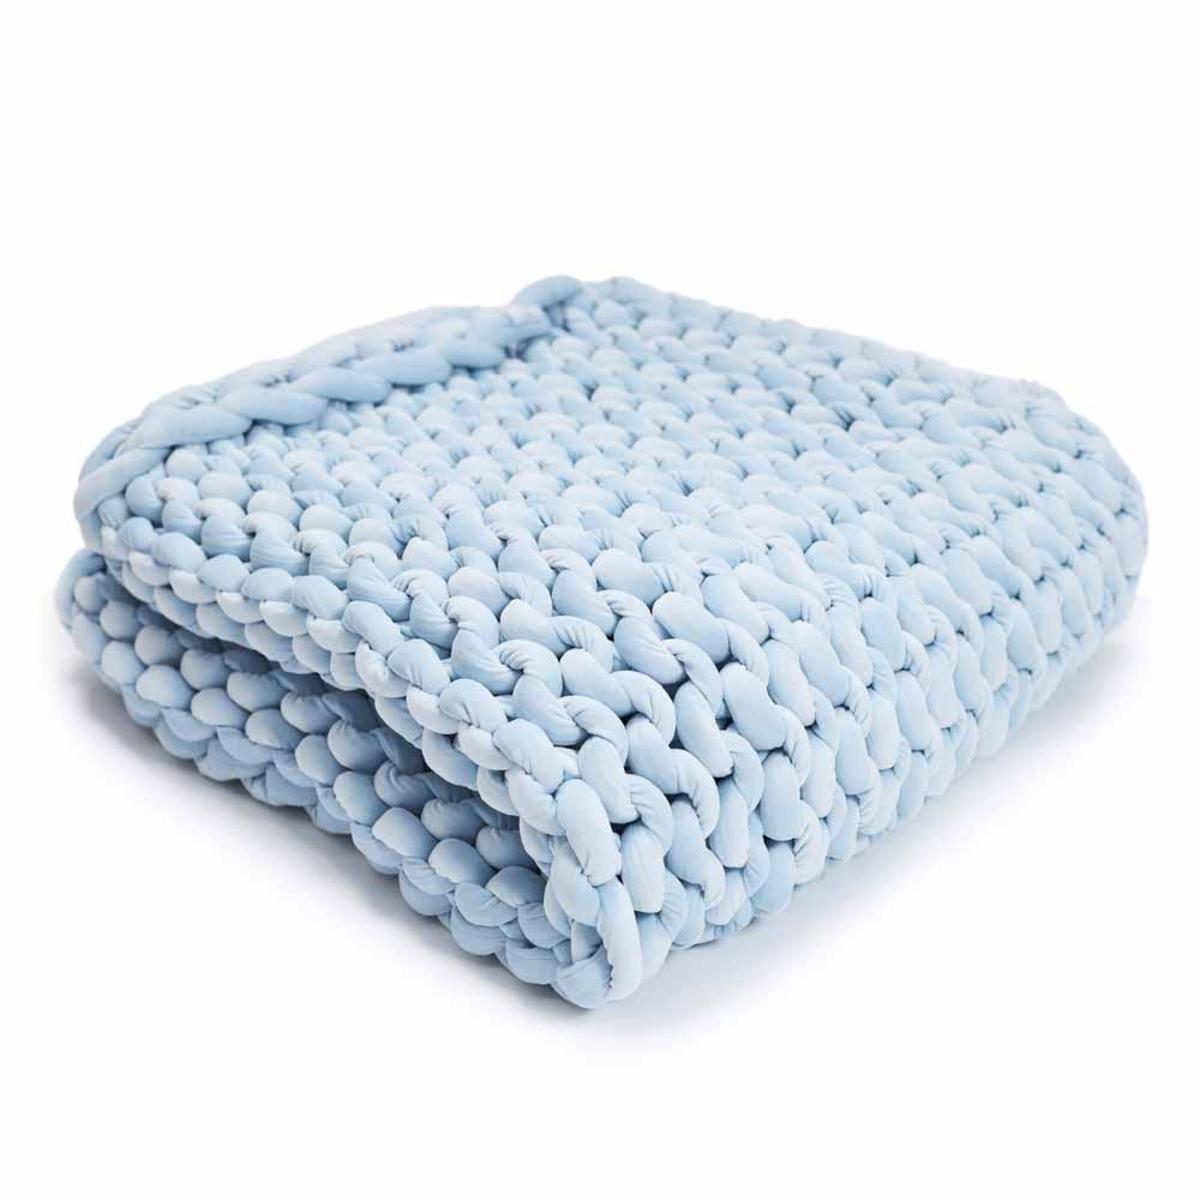 Hush 15lbs Minky Knitted Weighted Throw Blanket